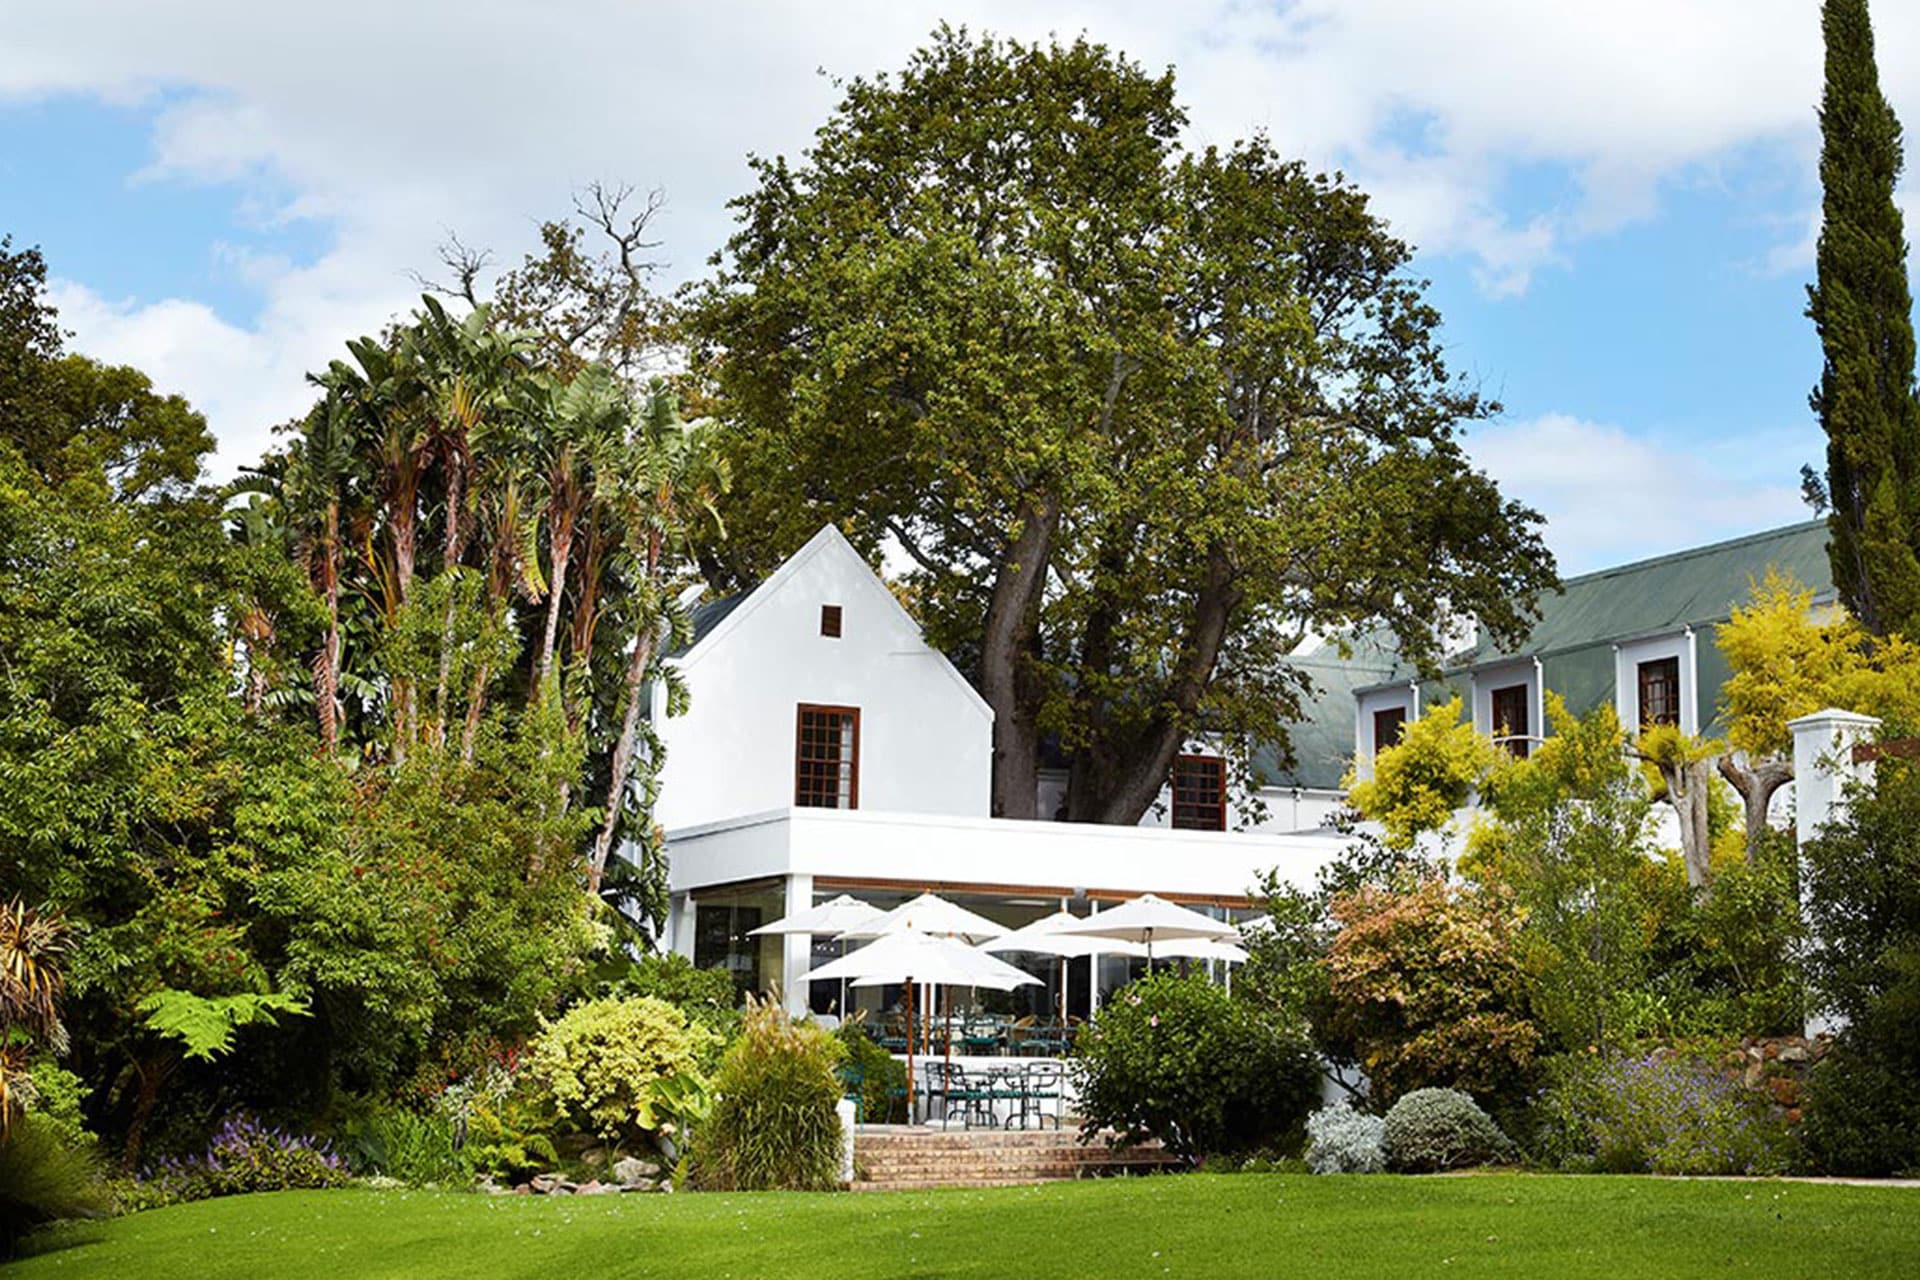 The restaurant terrace surrounded by manicured gardens and trees at The Conservatory – one of the top 10 fine dining restaurants in Cape Town.